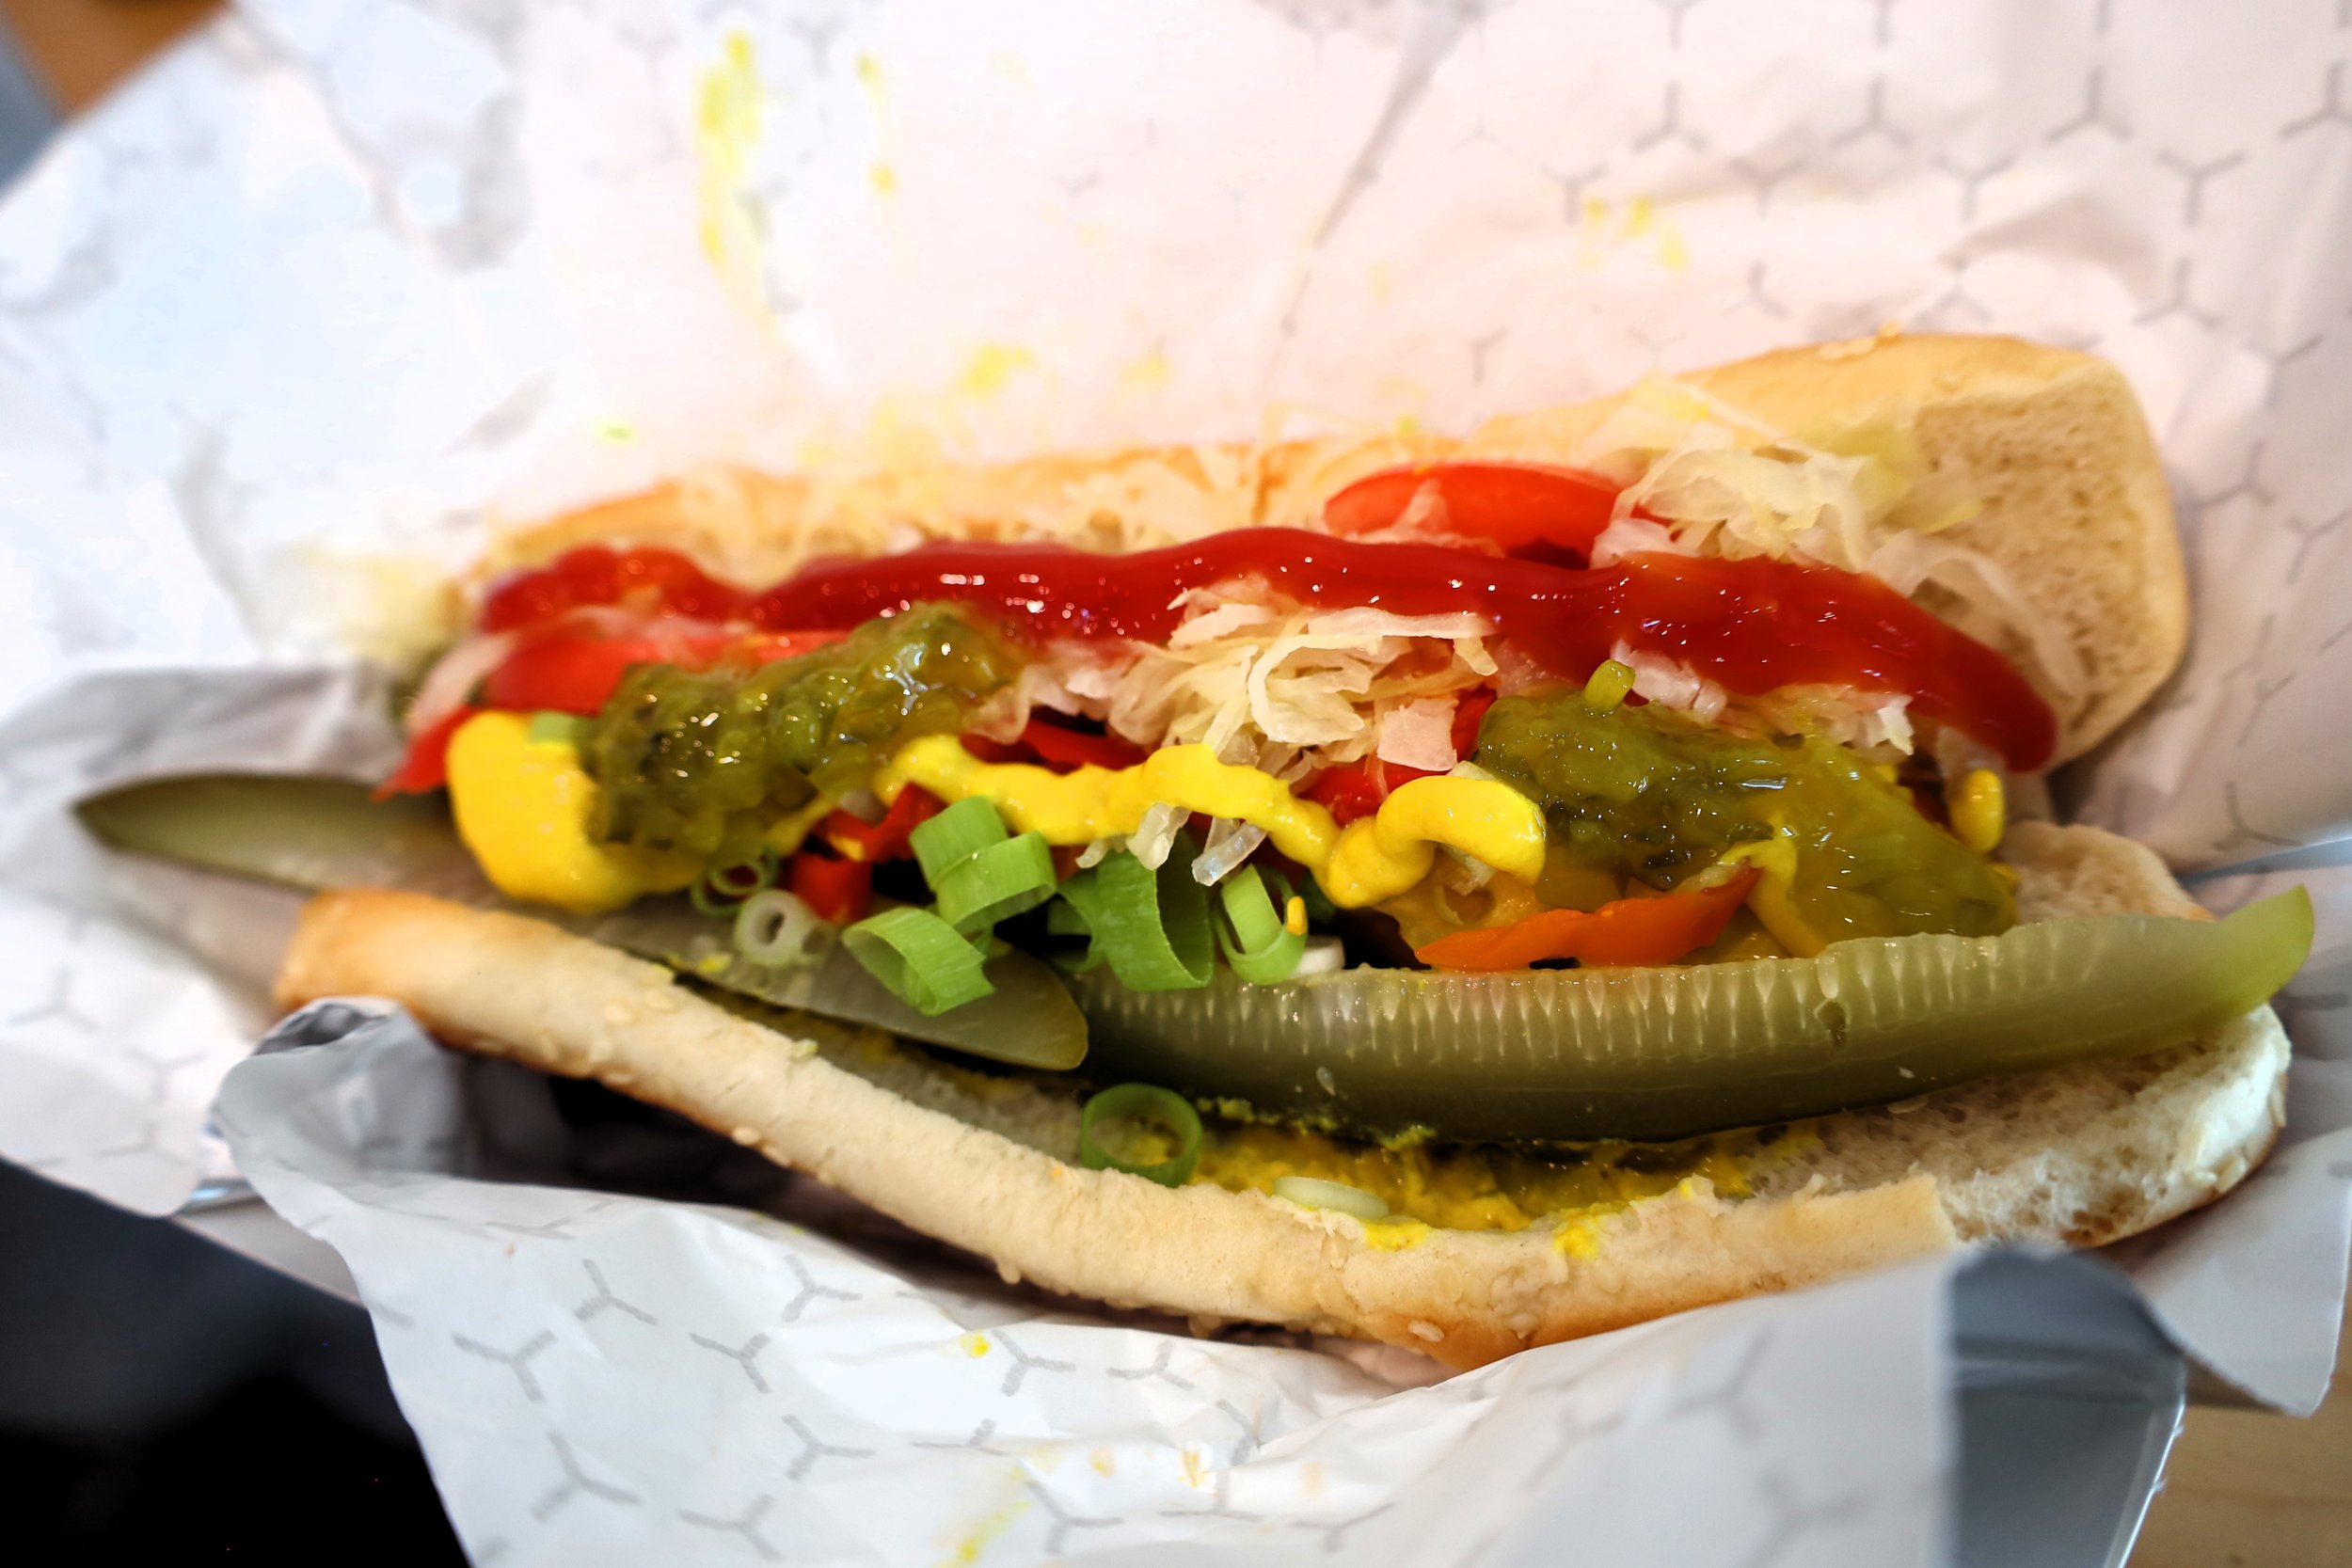 A dressed Chicago Dog with mustard, relish, onion, tomato, pickle, celery salt and banana peppers. All photos by David Tuan Bui.